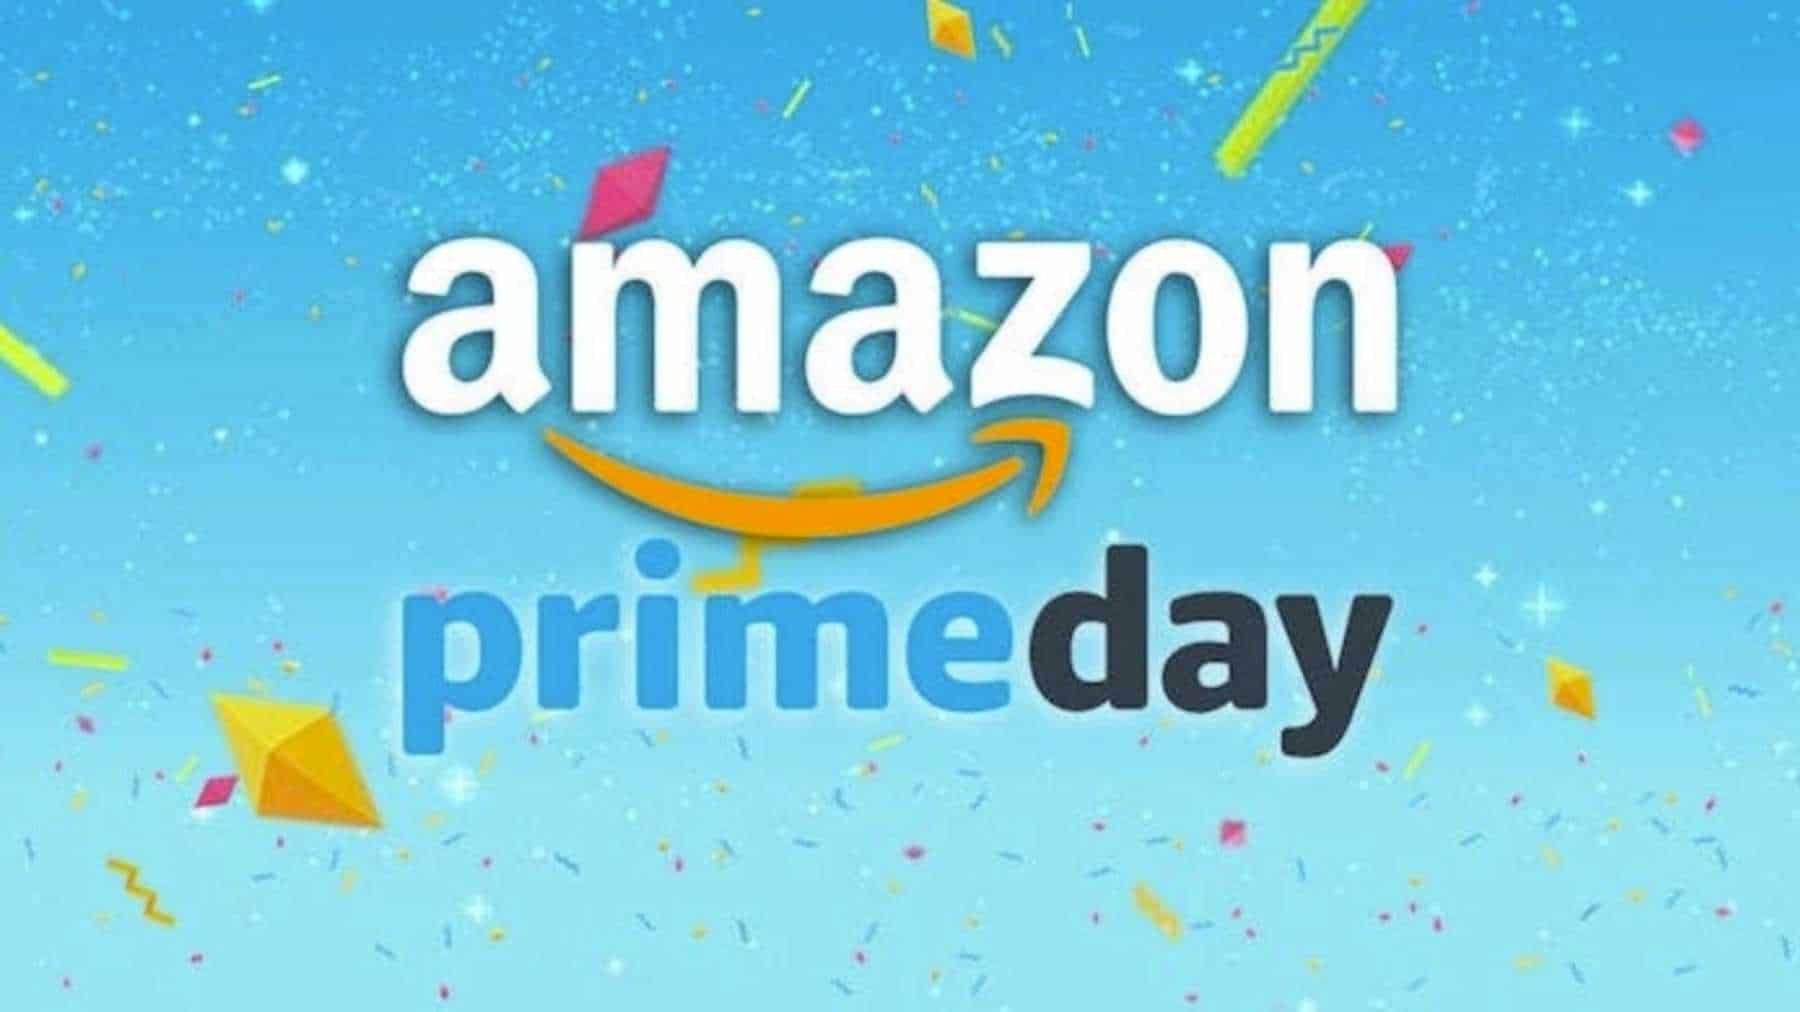 ‘Unplanned’ Prime Day purchases to fall 10 per cent